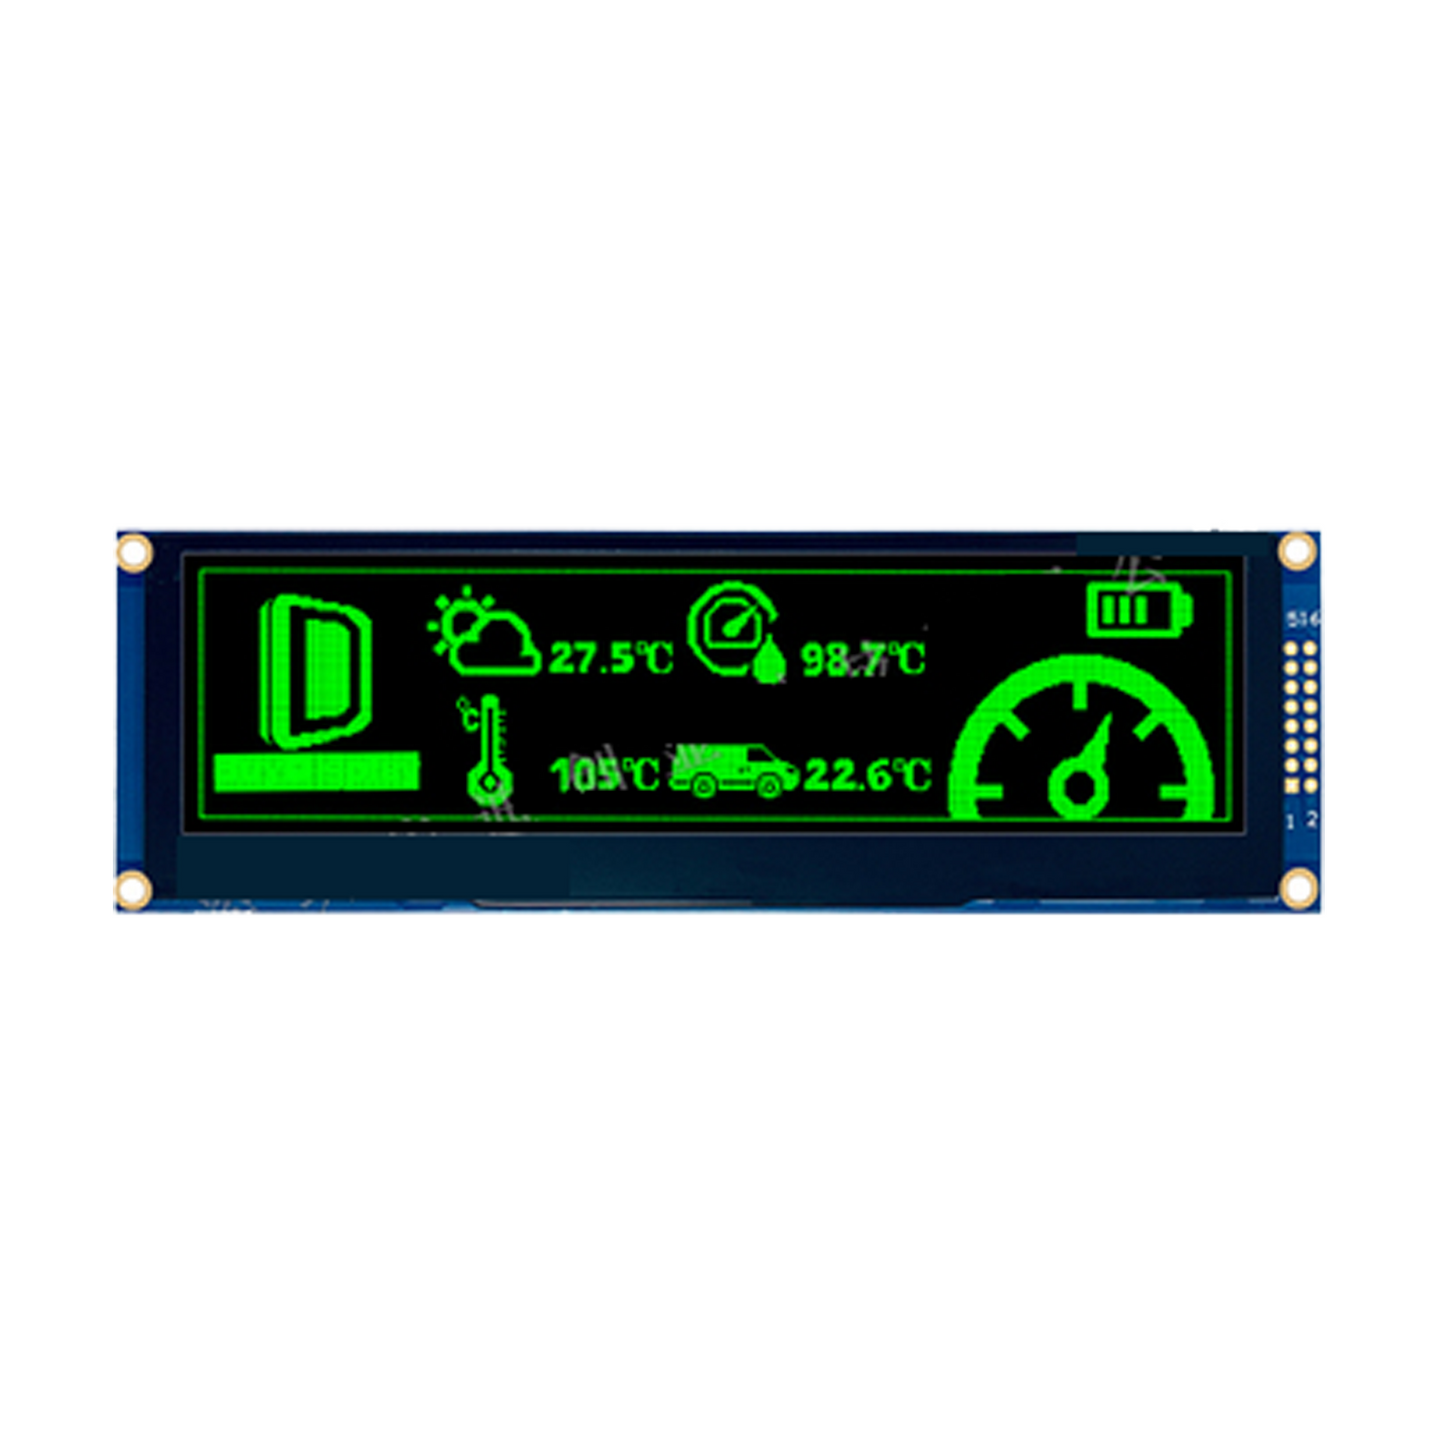 5.5-inch green OLED graphic display module with 256x64 resolution, connected via SPI